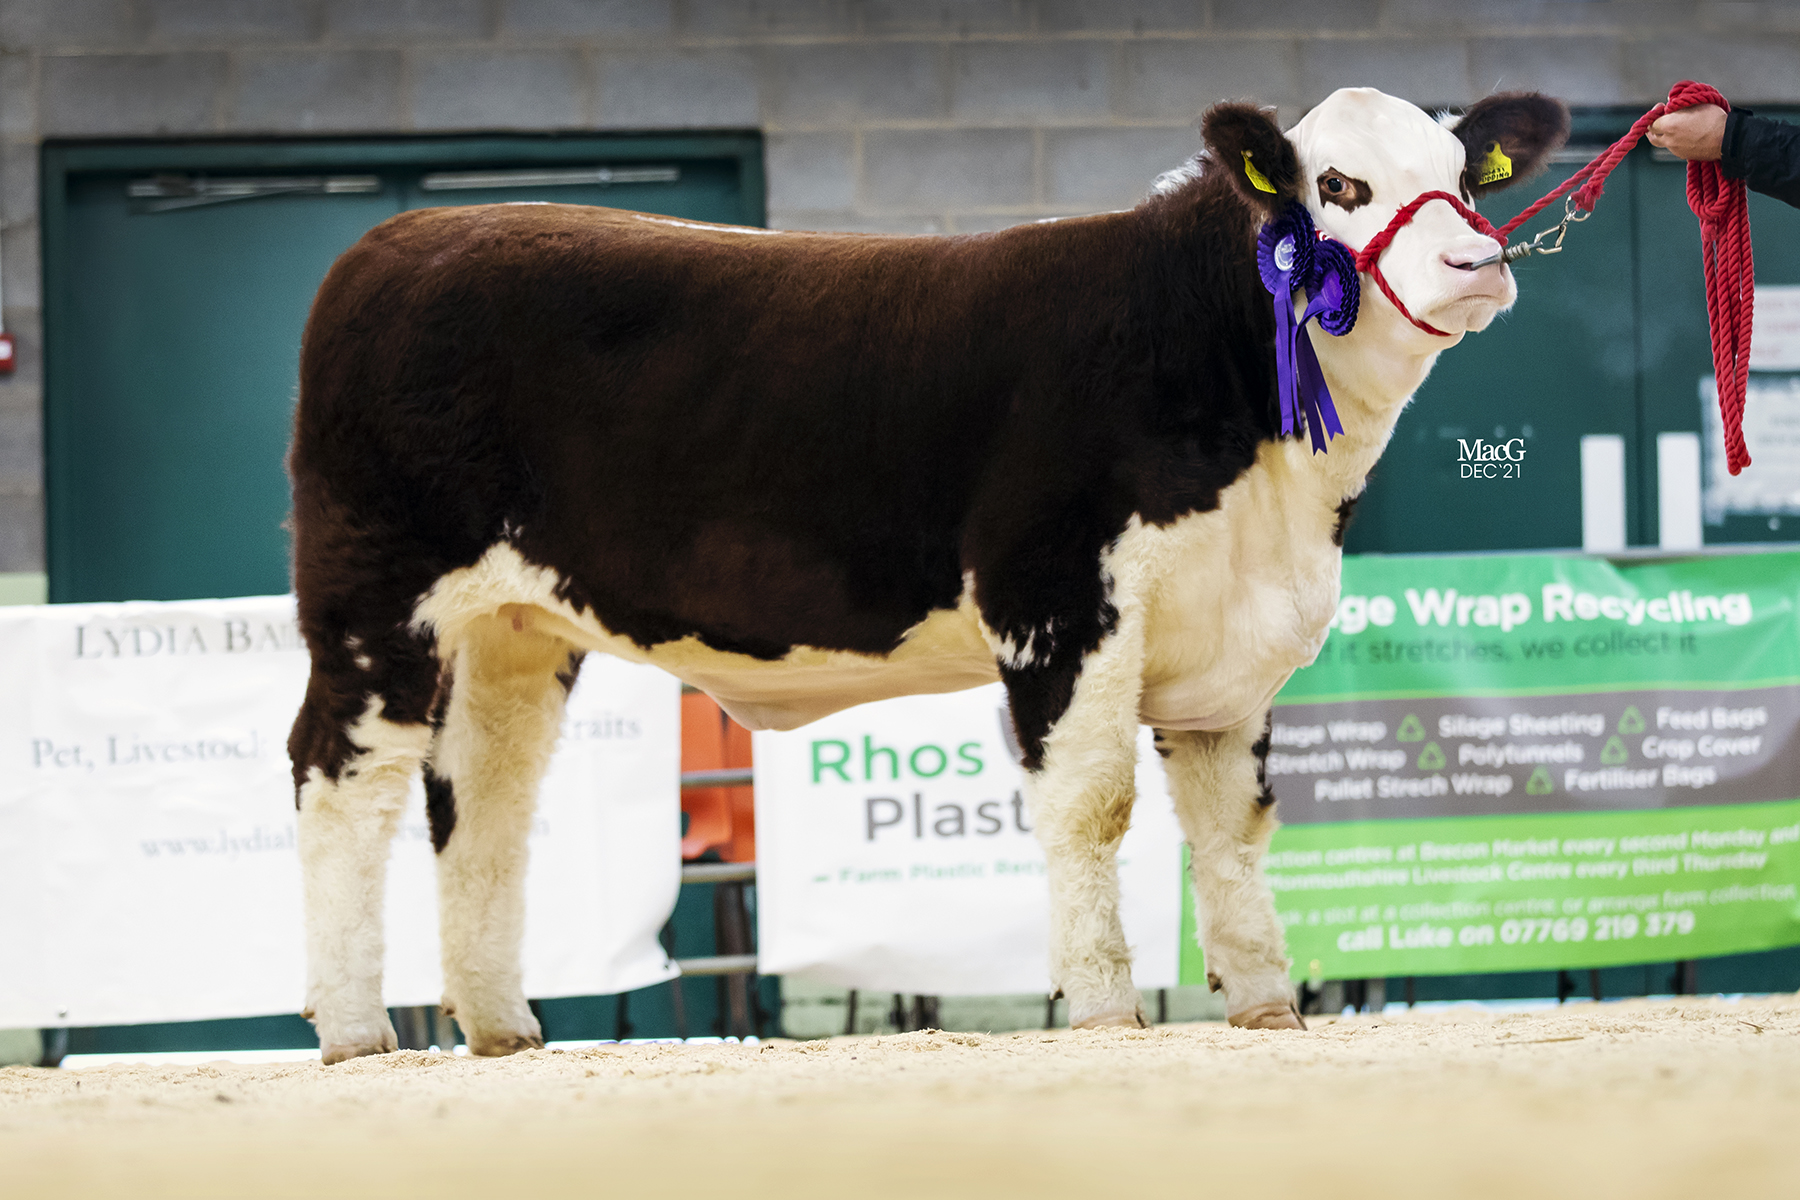 Spartan strikes supreme at Christmas calf show - Hereford Cattle Society